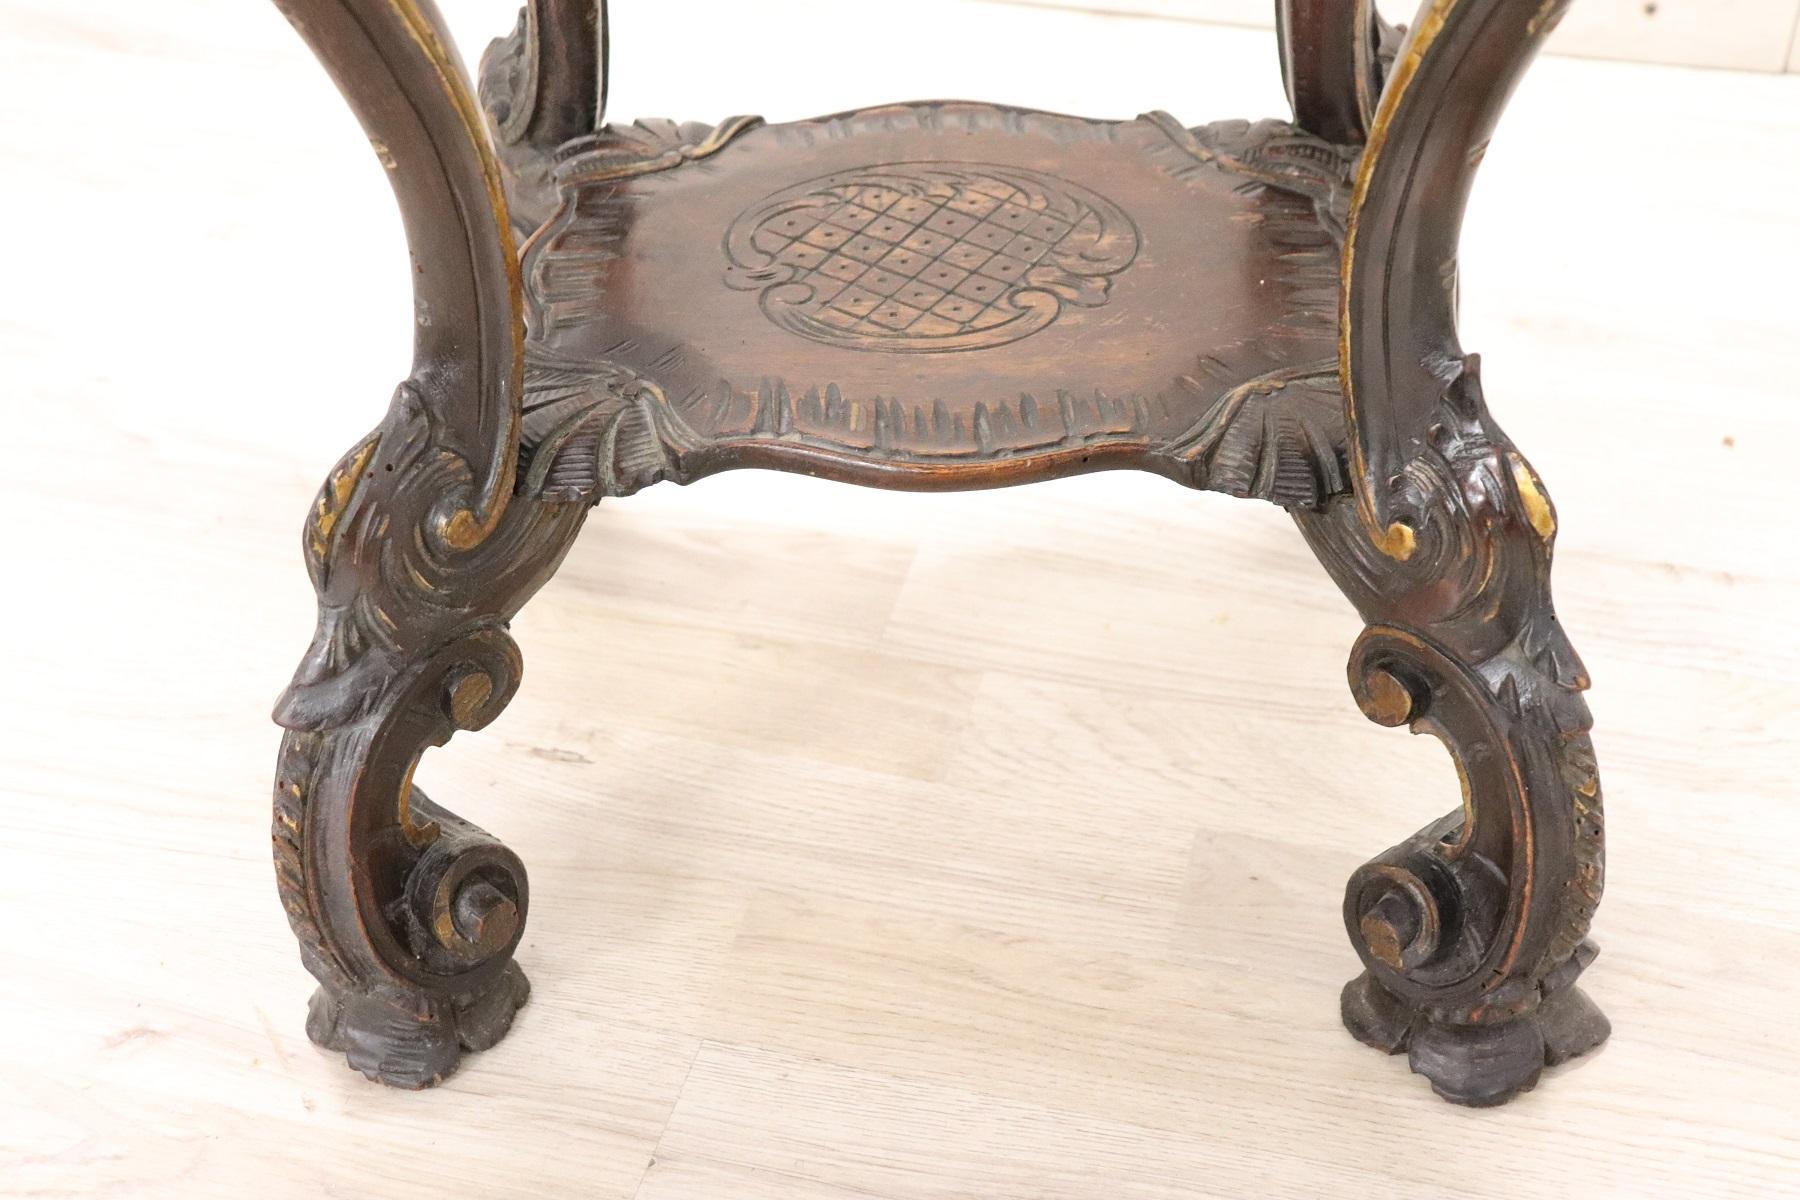 Rare and fine quality Italian renaissance style gueridon table or pedestal table. The table presents a refined carving work in walnut wood. Cherub heads on either side of the top and delightful wavy legs. Really delicious table. True Italian